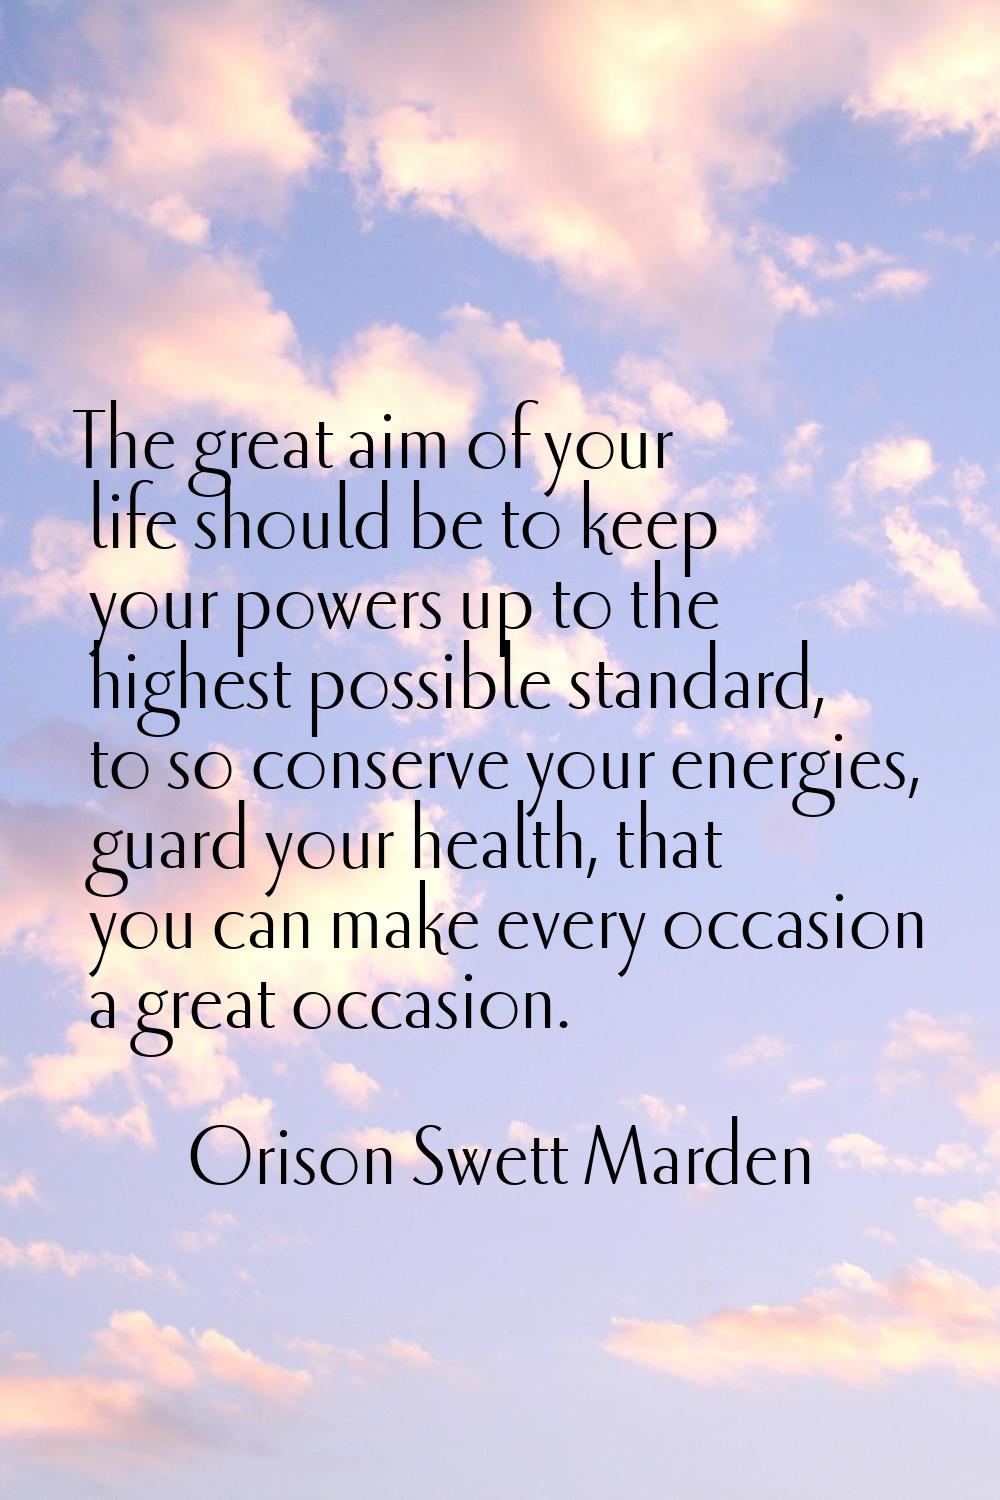 The great aim of your life should be to keep your powers up to the highest possible standard, to so